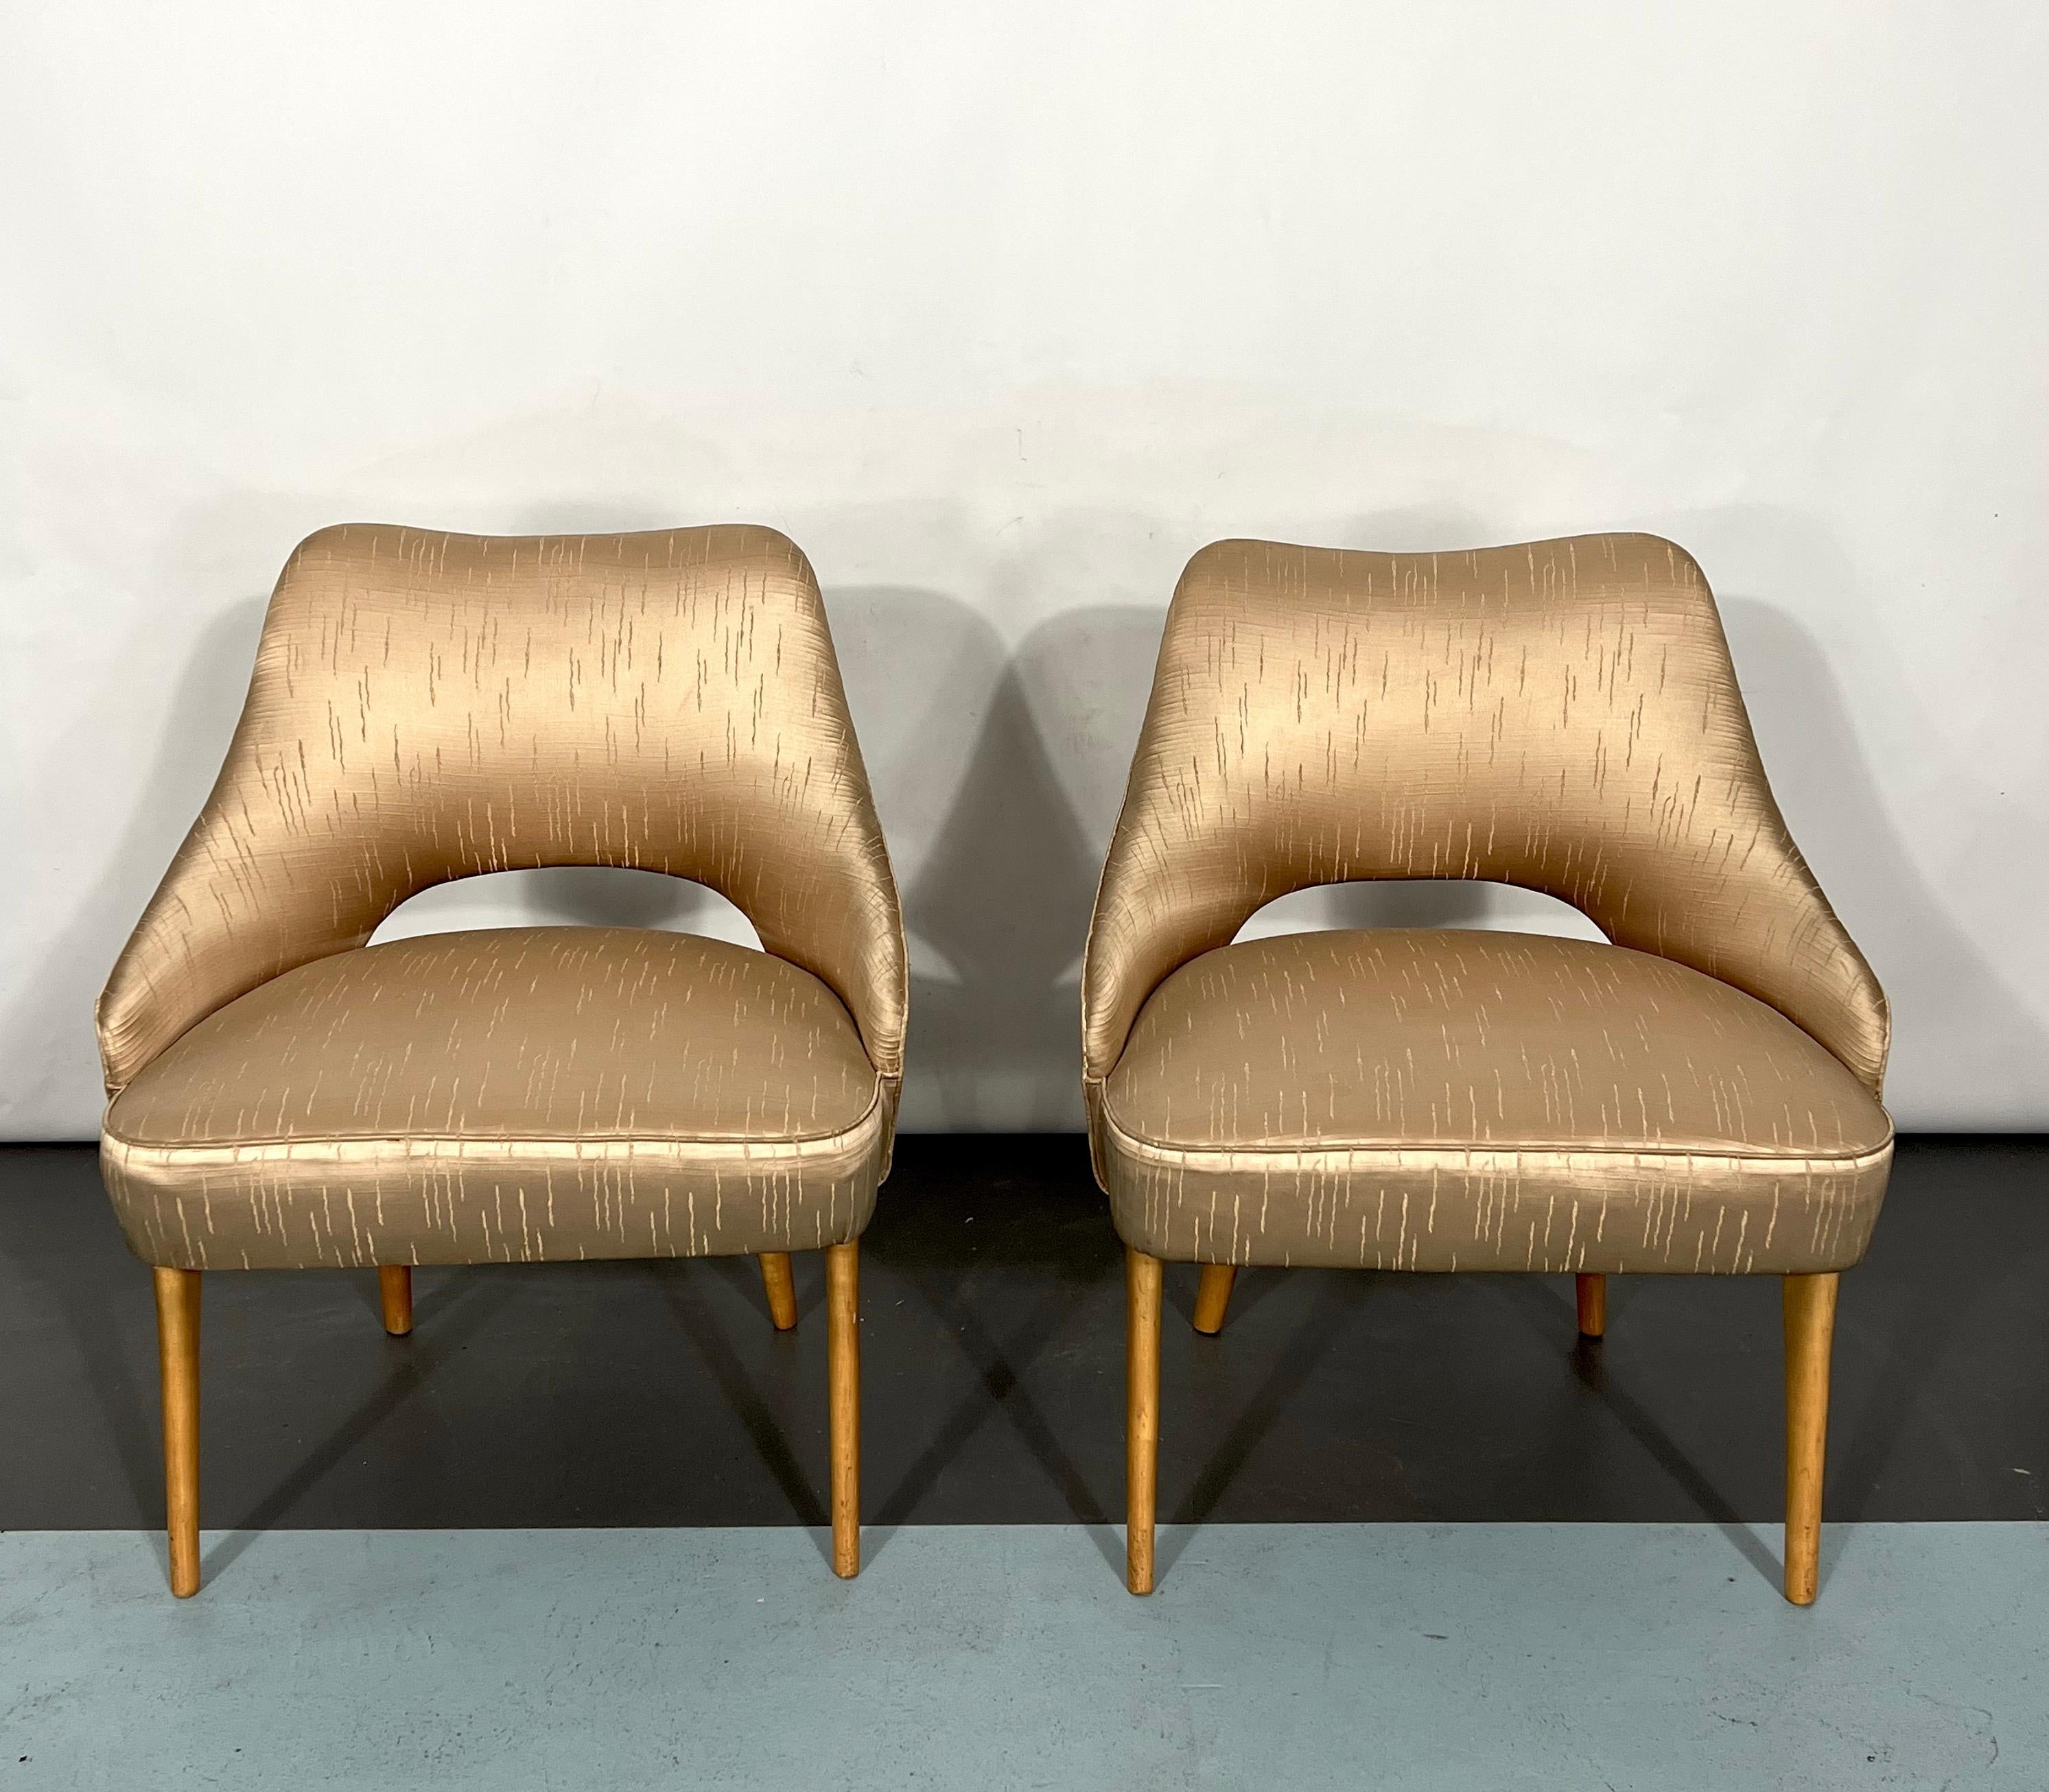 Italian Mid-Century Bedroom Chairs from 50s, Set of Two For Sale 4